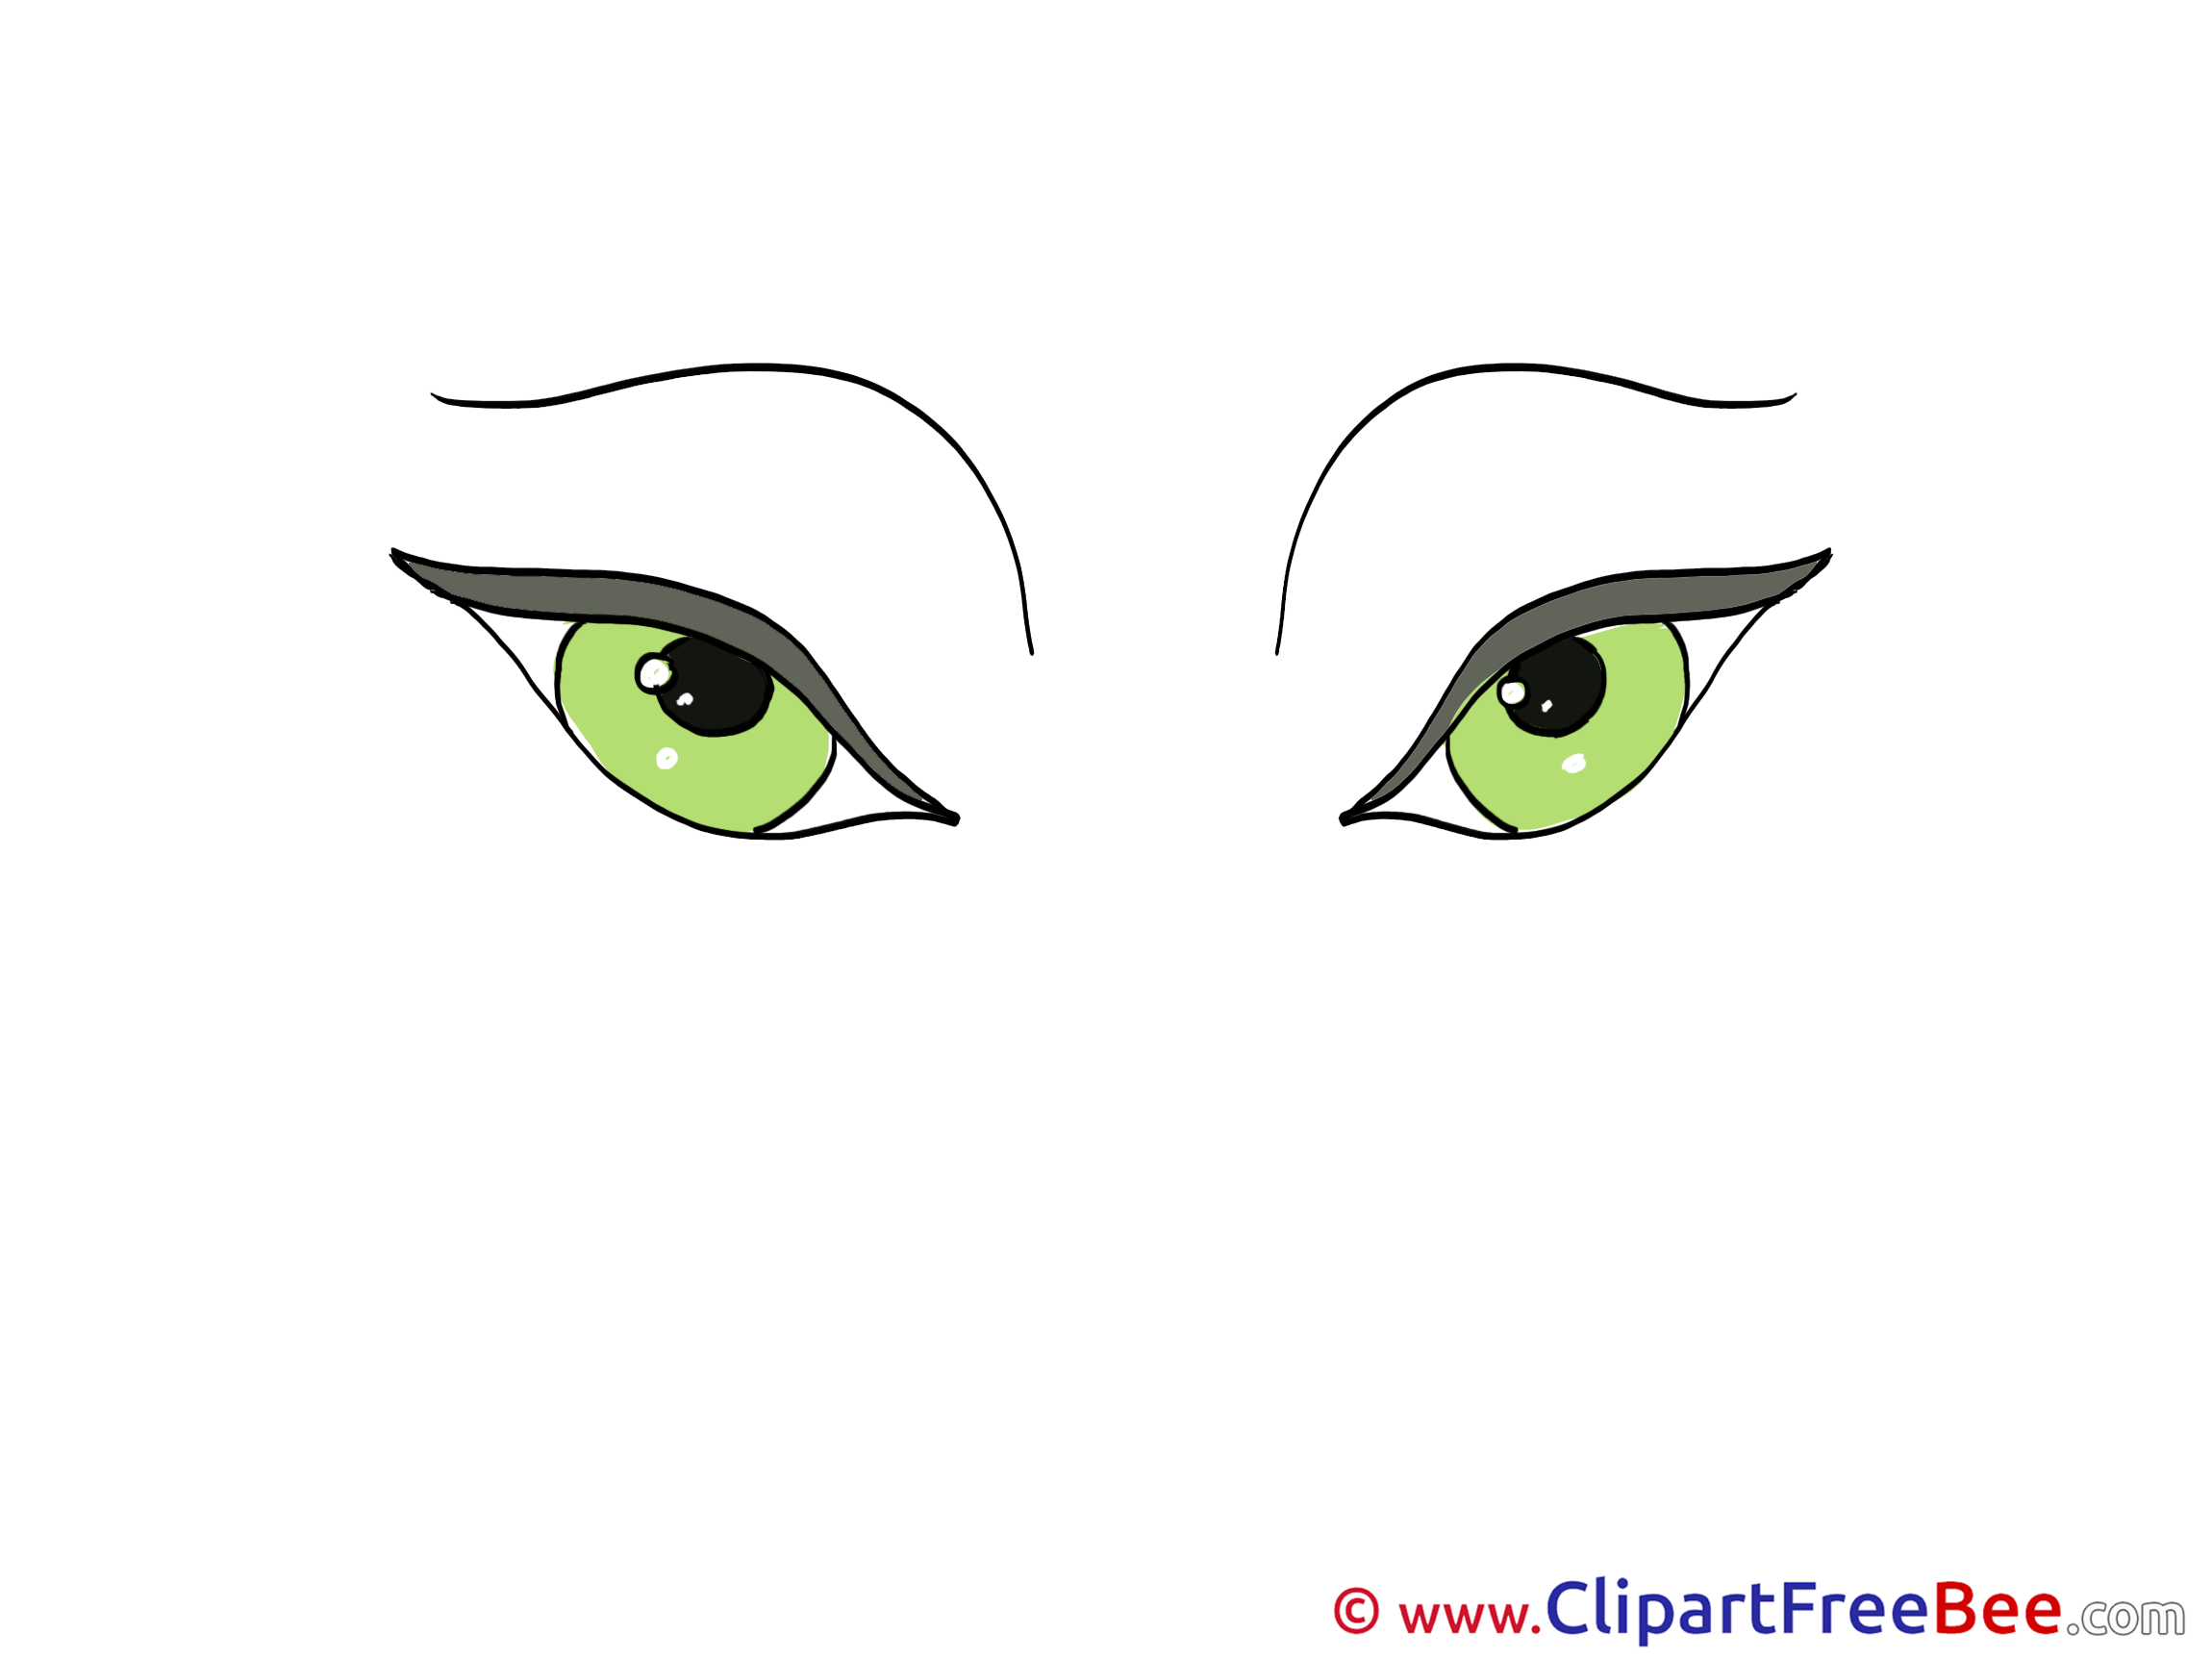 Green Eyes free printable Cliparts and Images